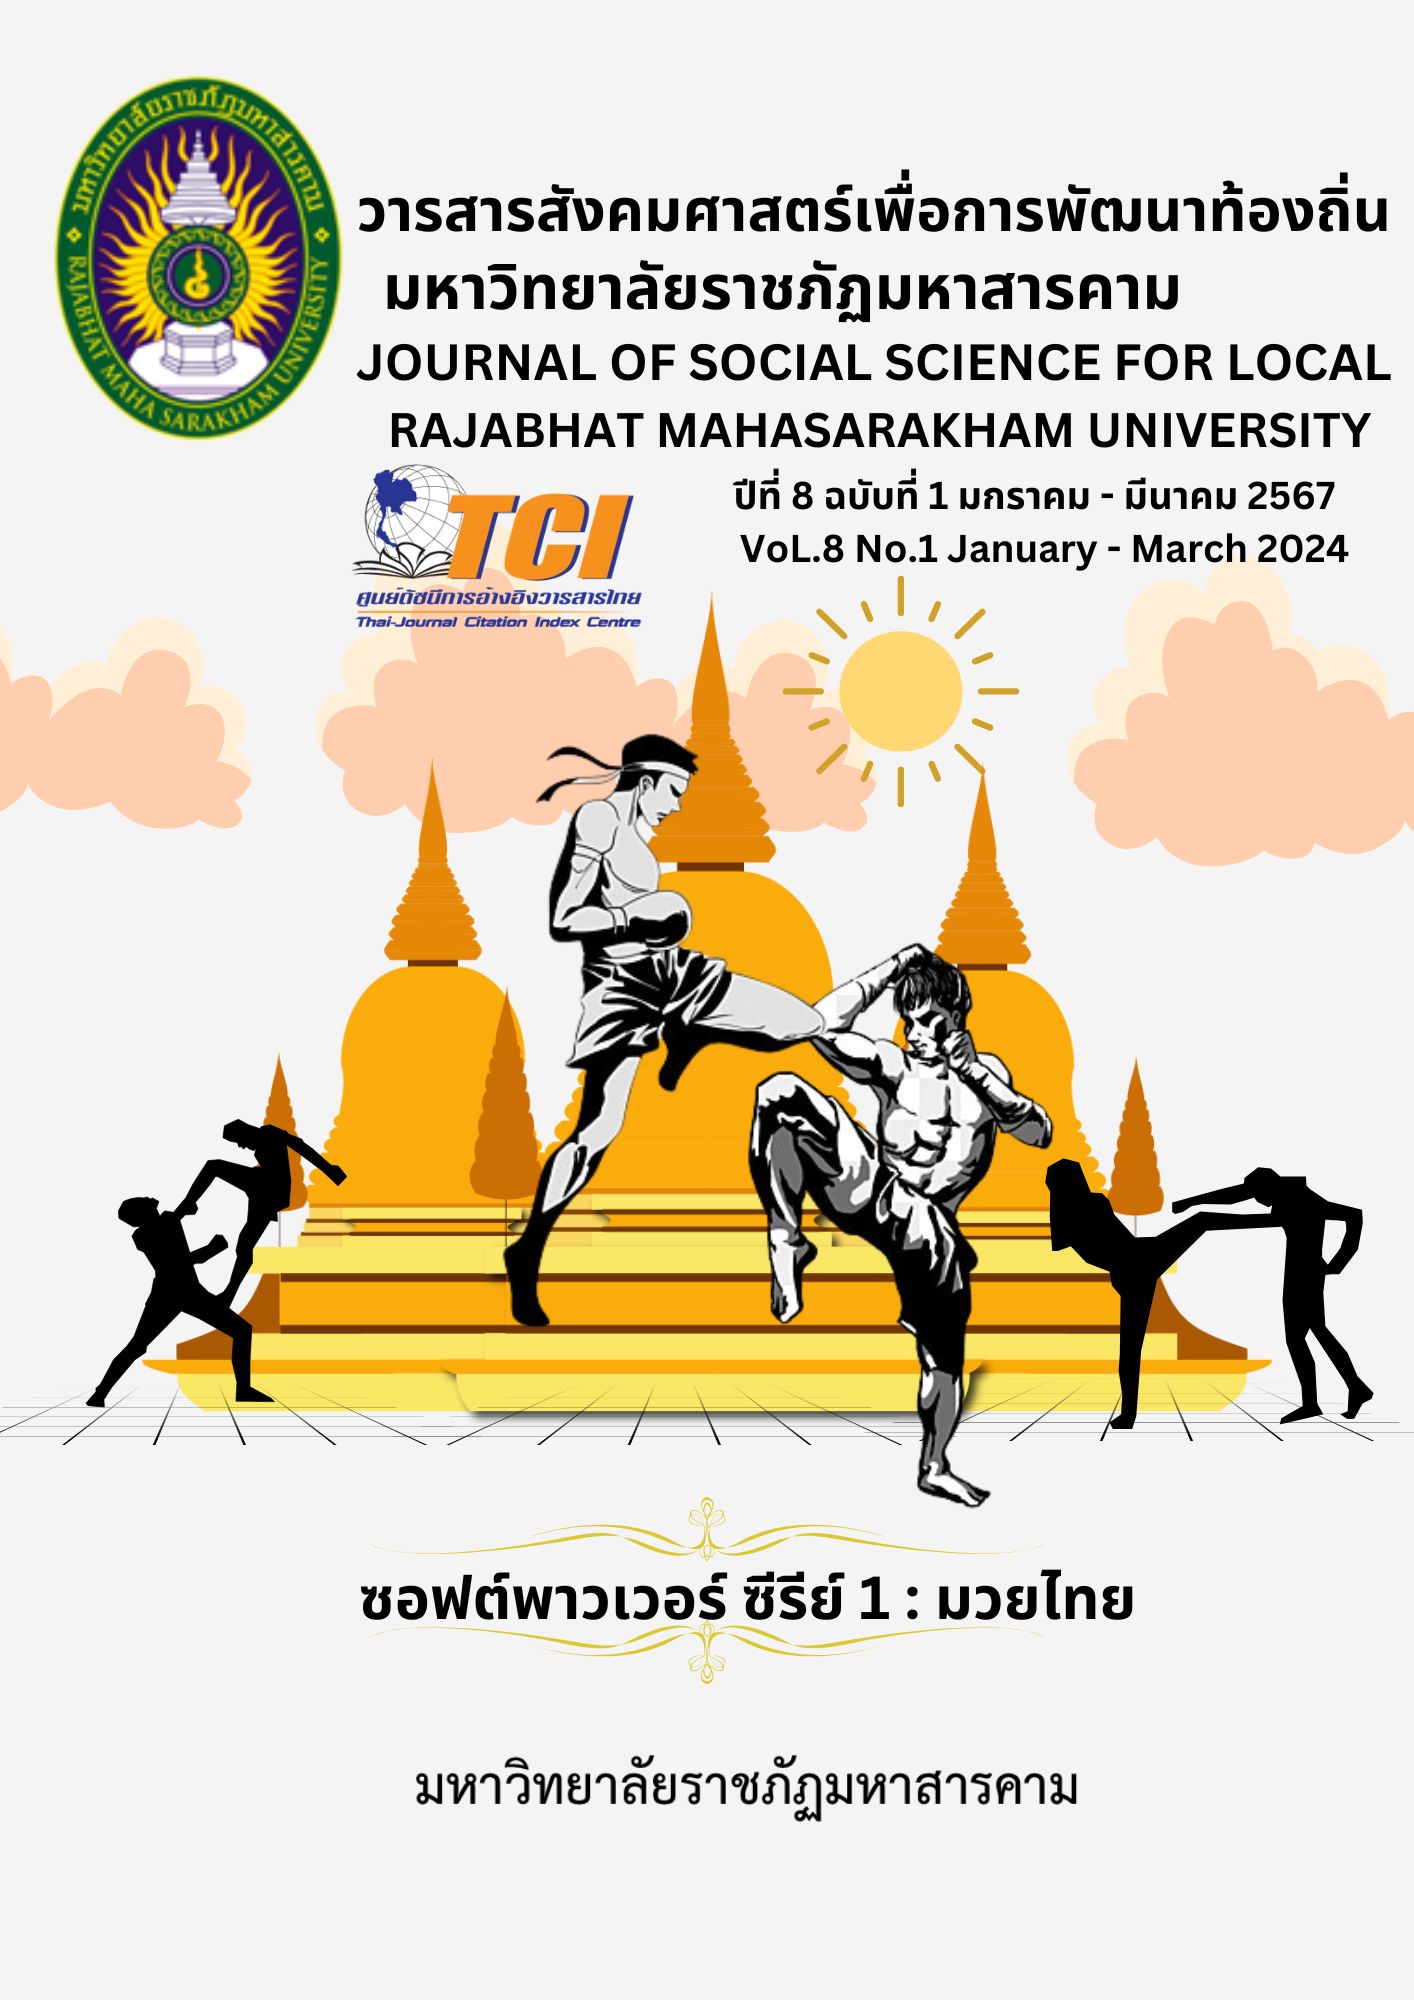 					View Vol. 8 No. 1 (2024): JOURNAL OF SOCIAL SCIENCE FOR LOCAL RAJABHAT MAHASARAKHAM UNIVERSITY
				